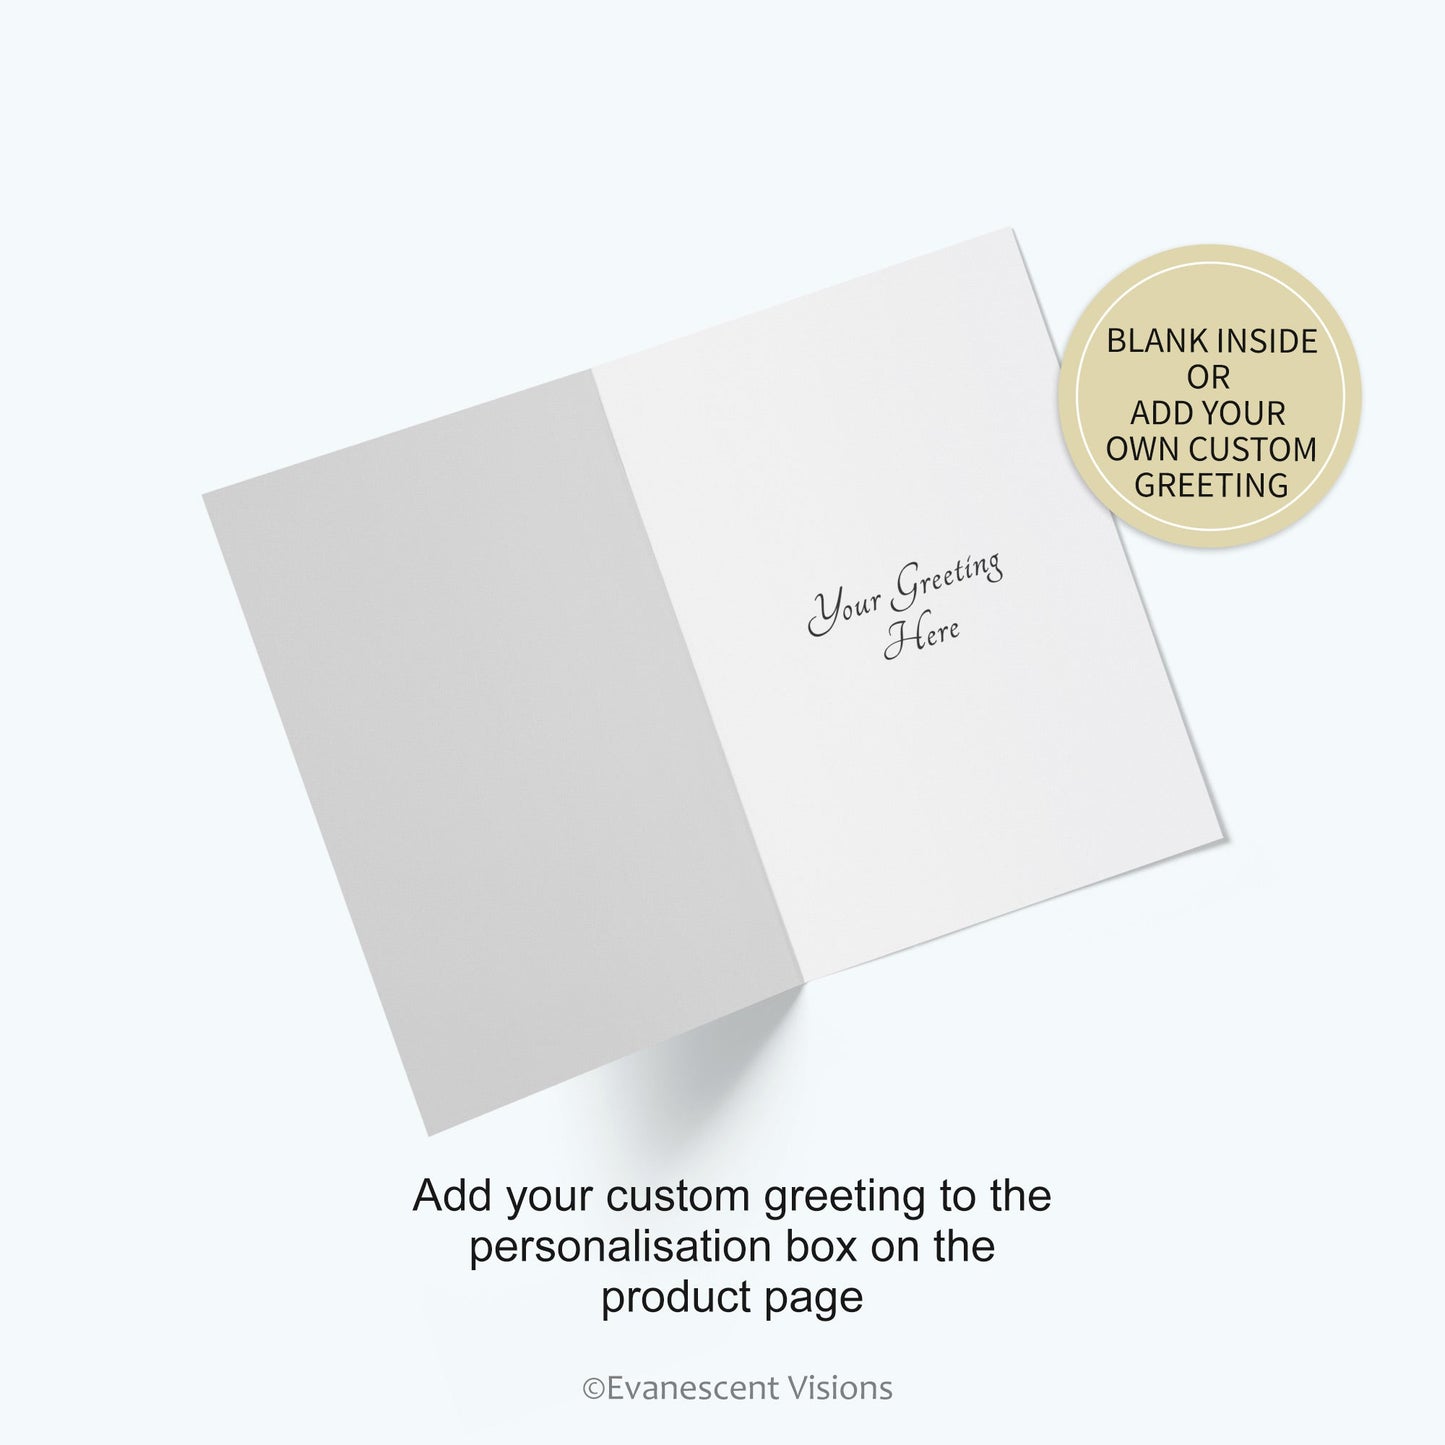 Inside view of a card with a personalised greeting and ordering instructions